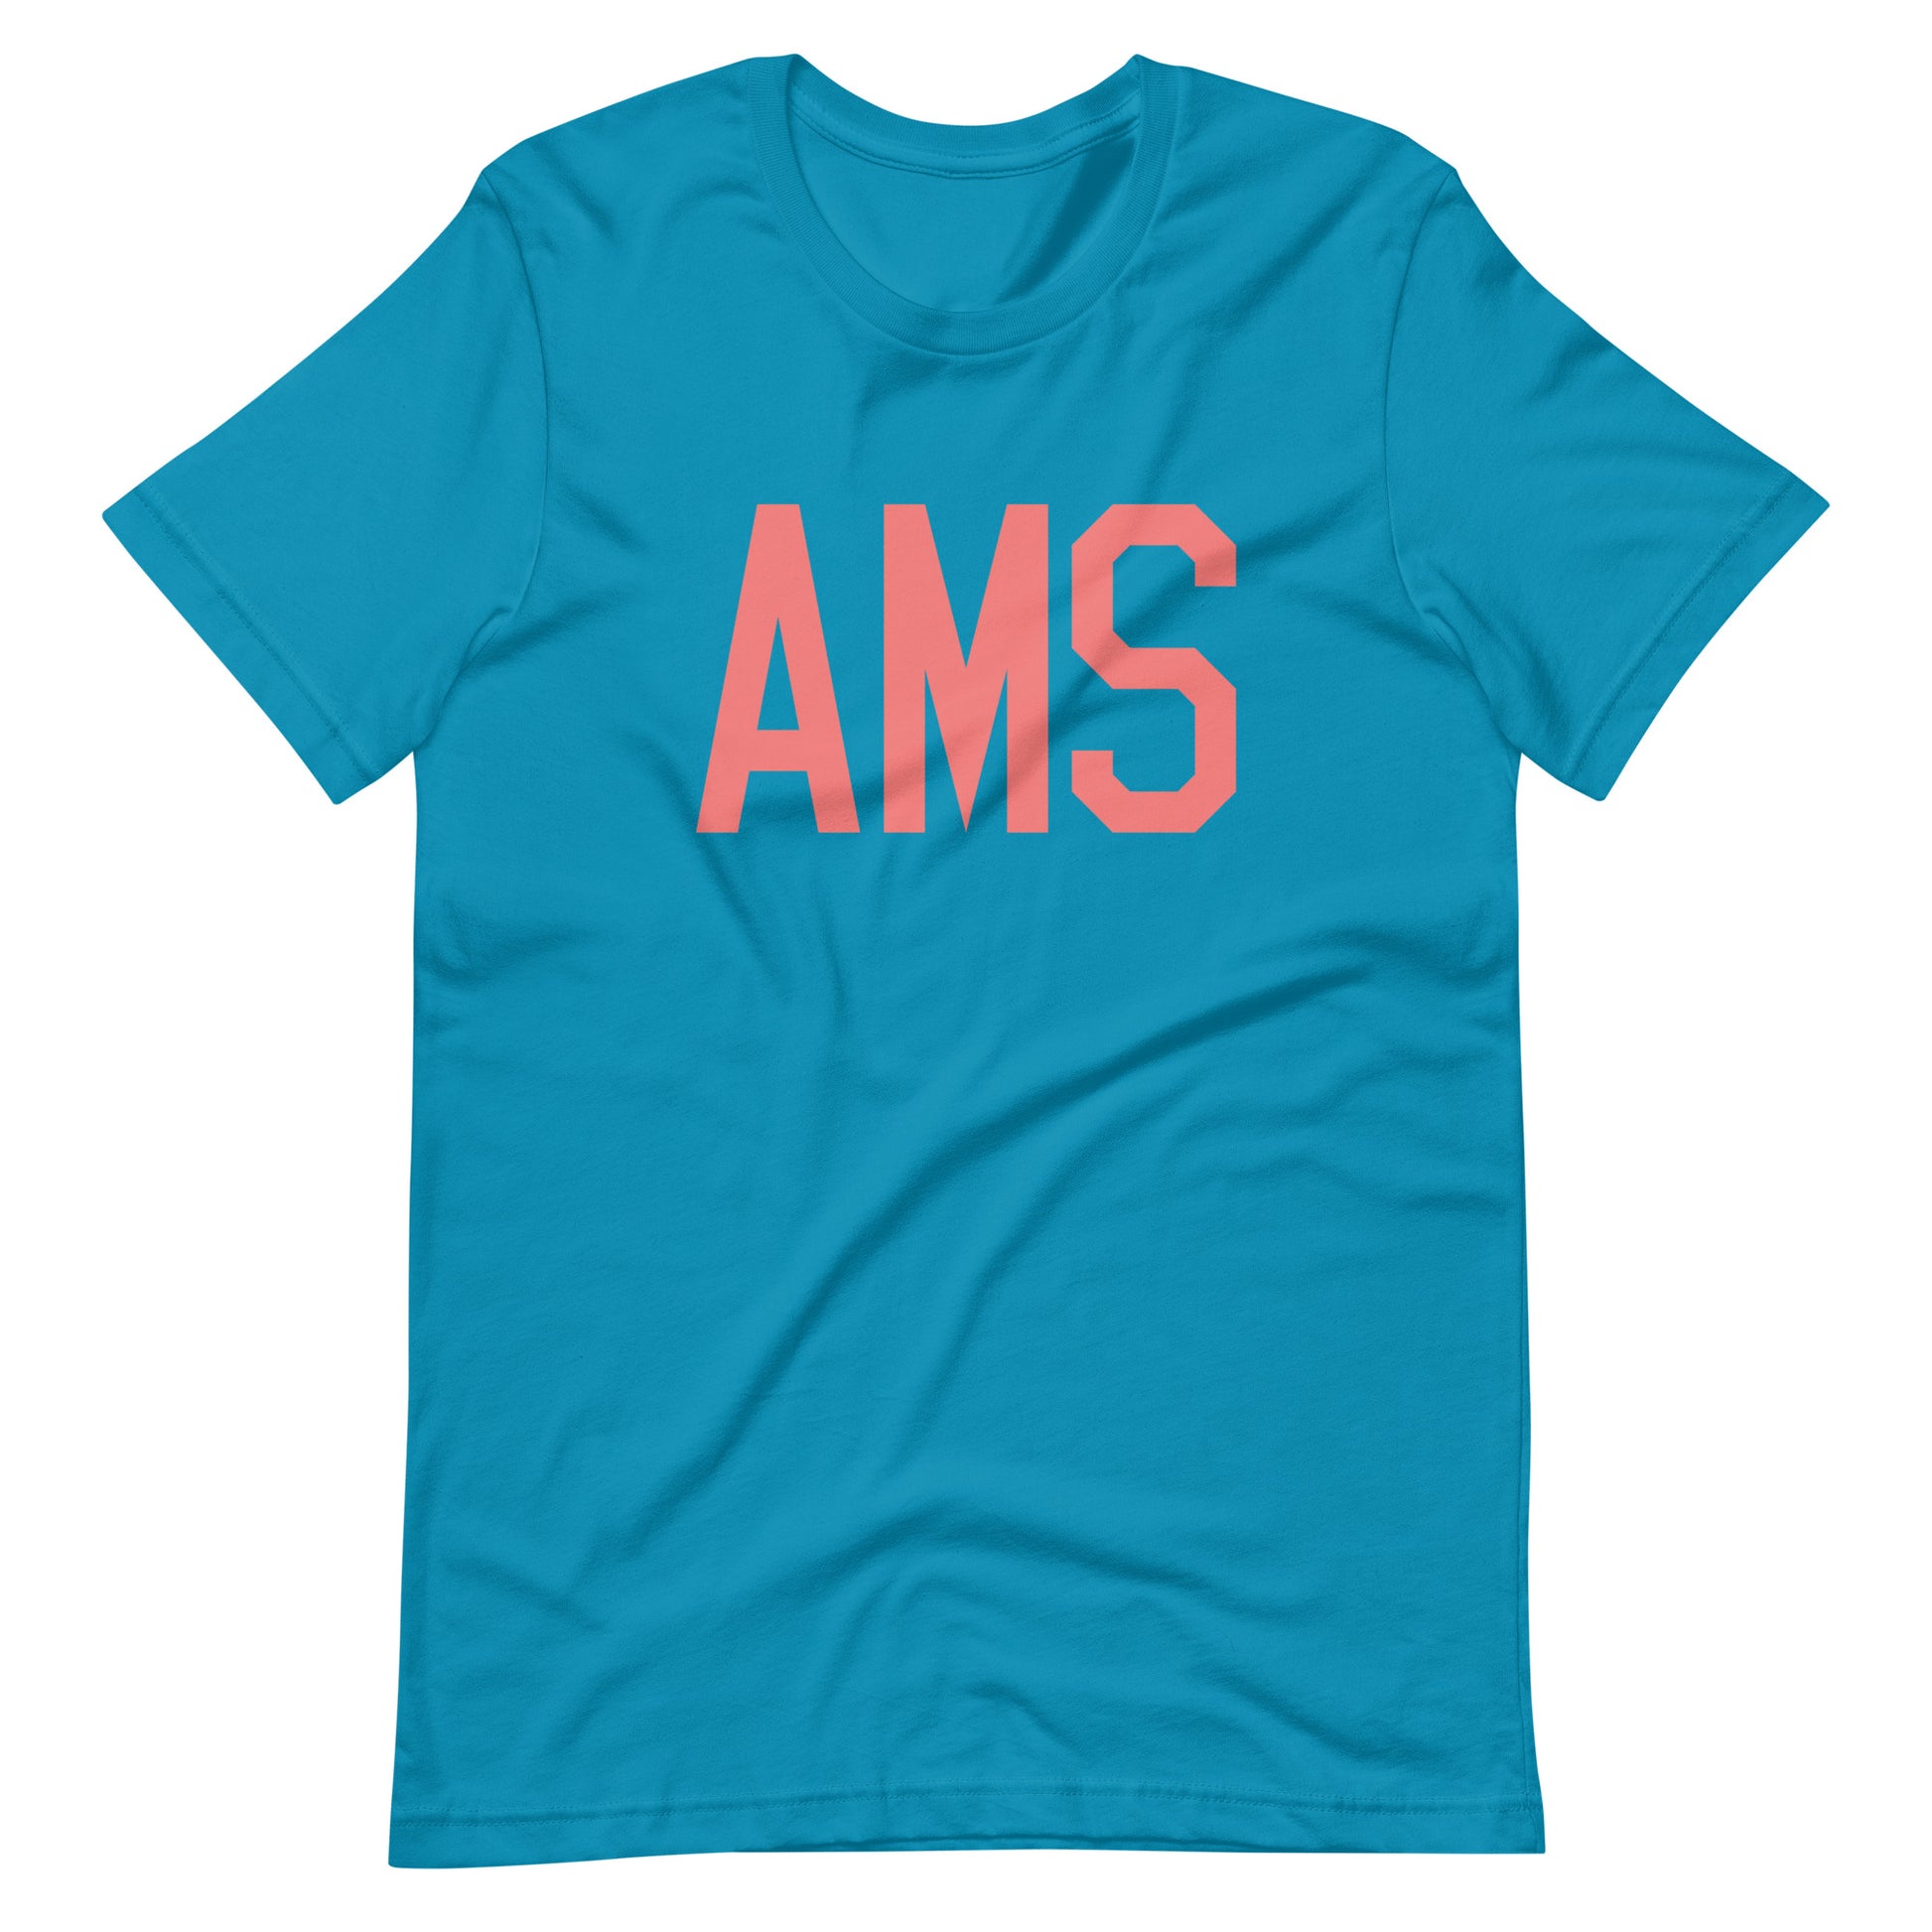 Aviation Enthusiast Unisex Tee - Pink Graphic • AMS Amsterdam • YHM Designs - Image 02